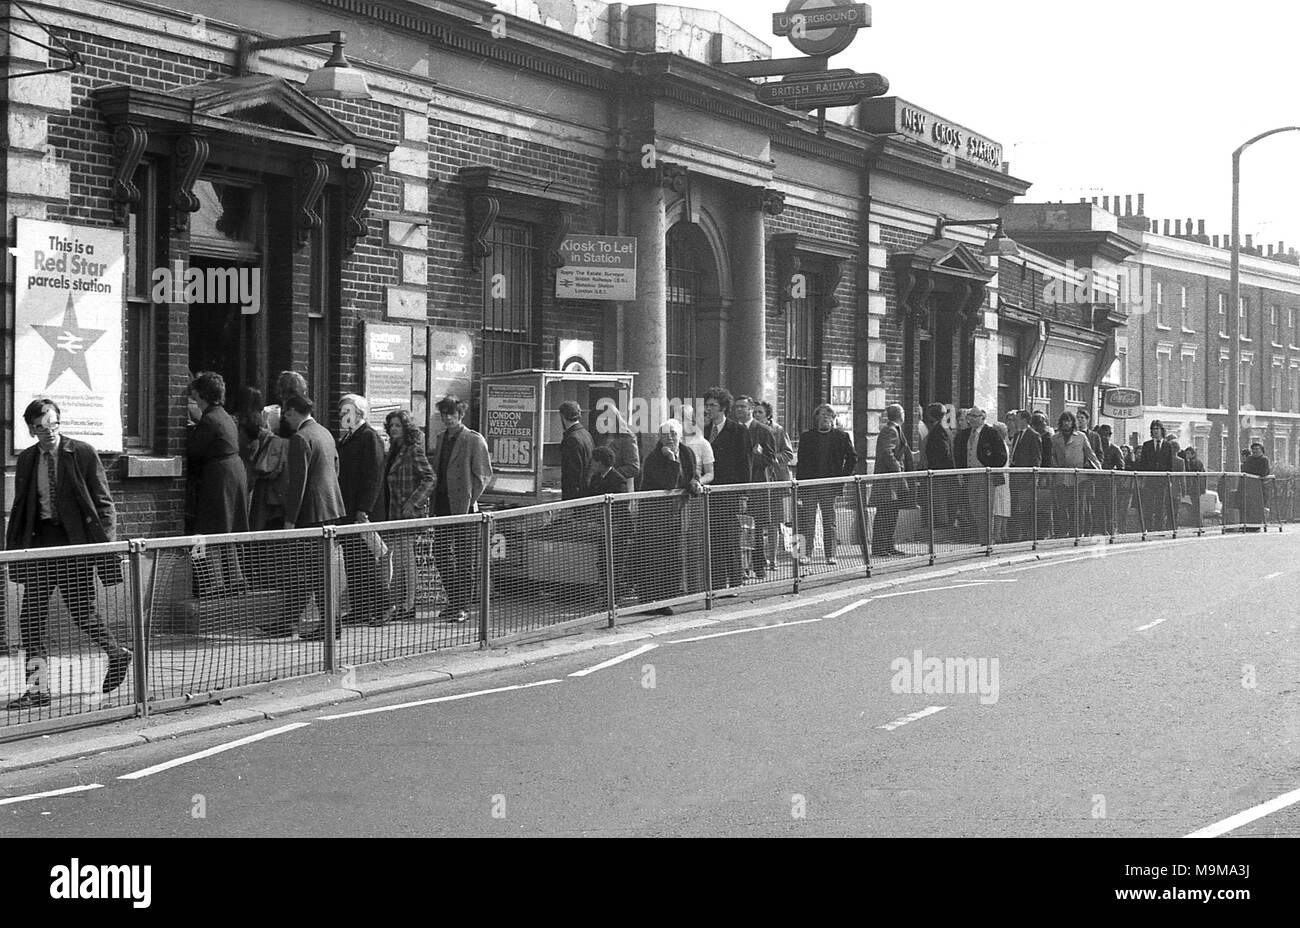 1973, New Cross Railway Station, South East London, a long line of commuters queuing up on the pavement outside waiting to enter the railway station due to overcrowding on the platforms because of cancelled trains. Stock Photo